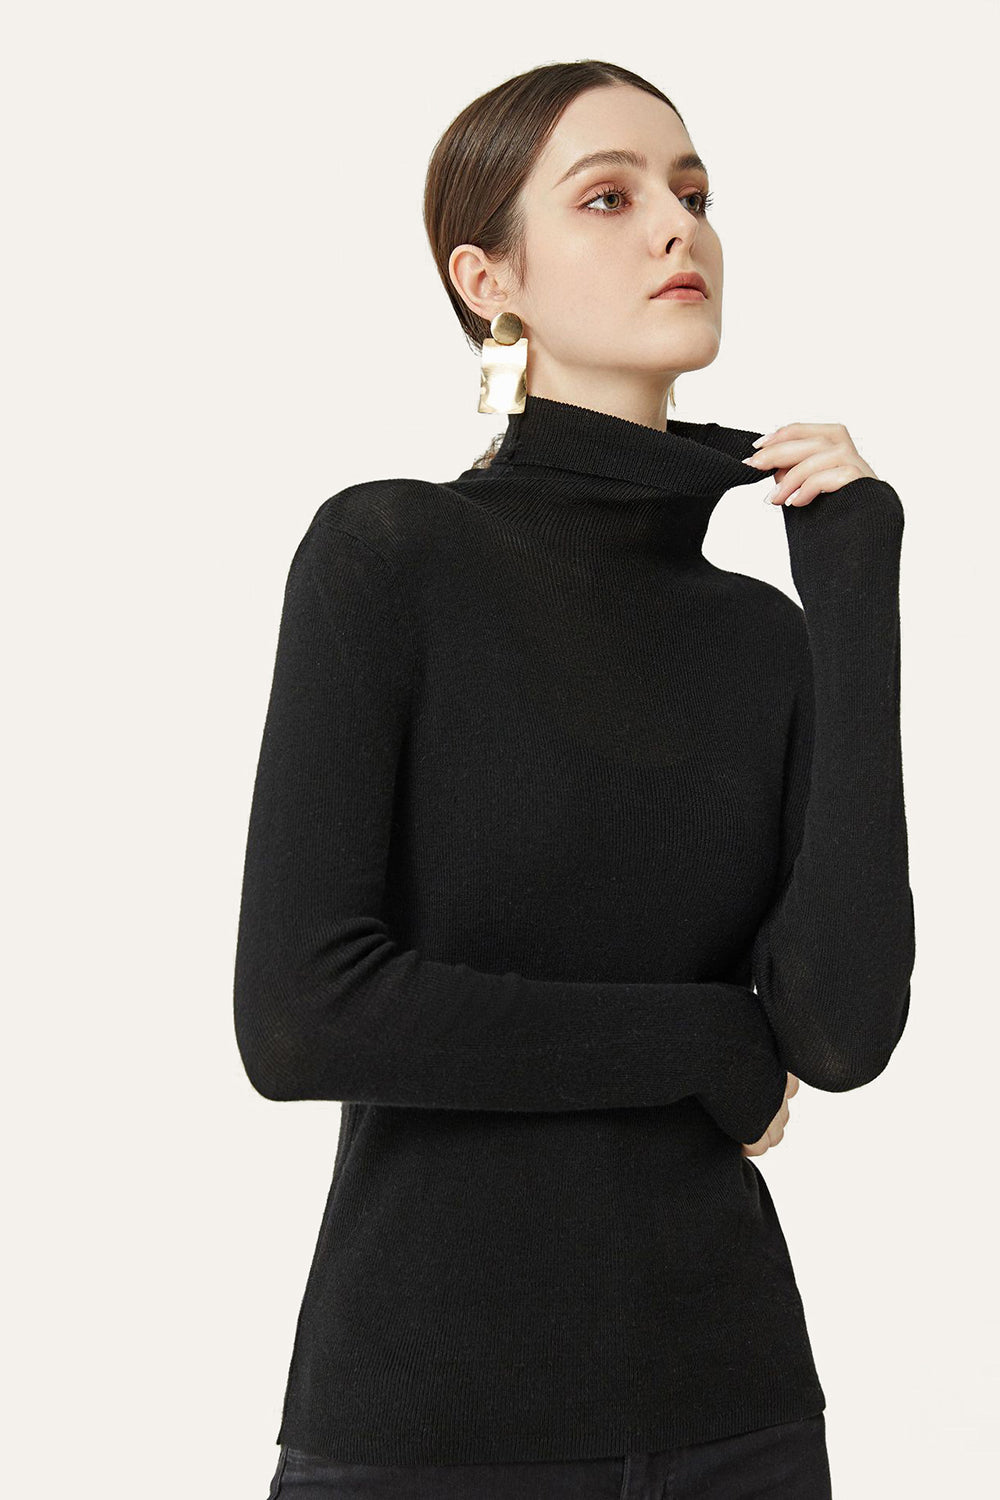 One Size Black Turtleneck Knitted Sweater